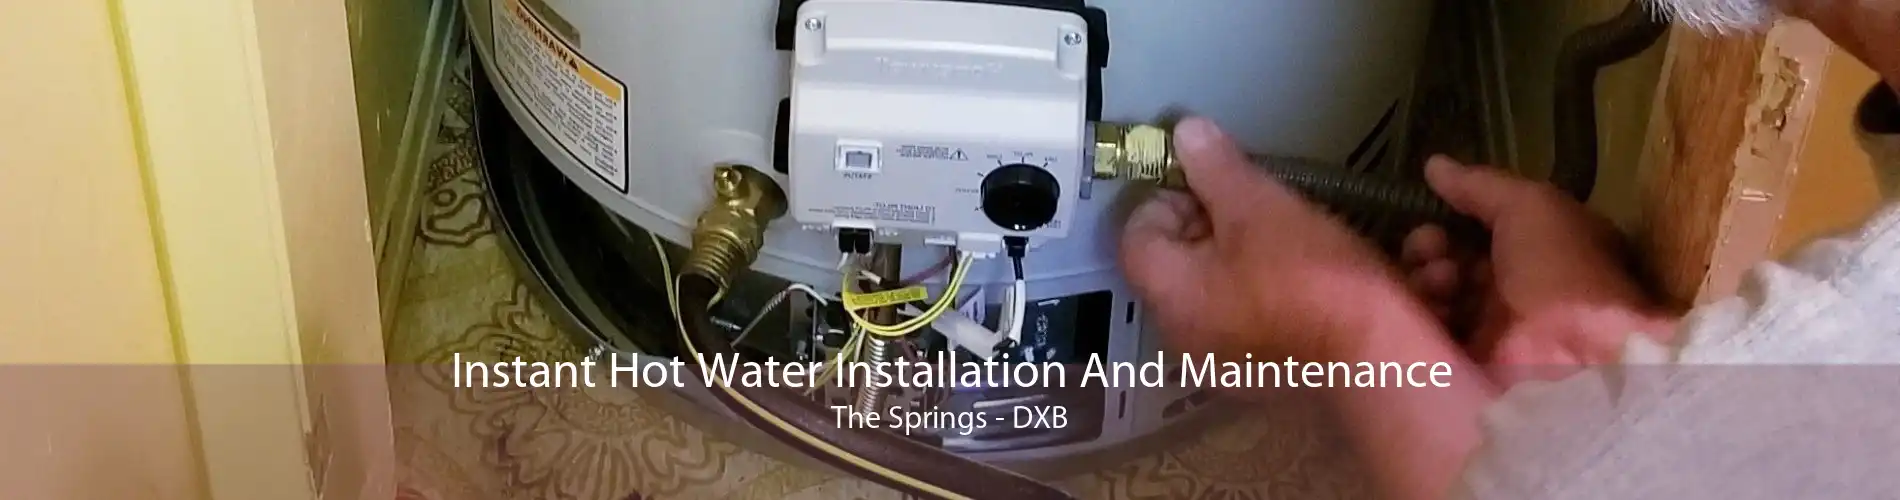 Instant Hot Water Installation And Maintenance The Springs - DXB